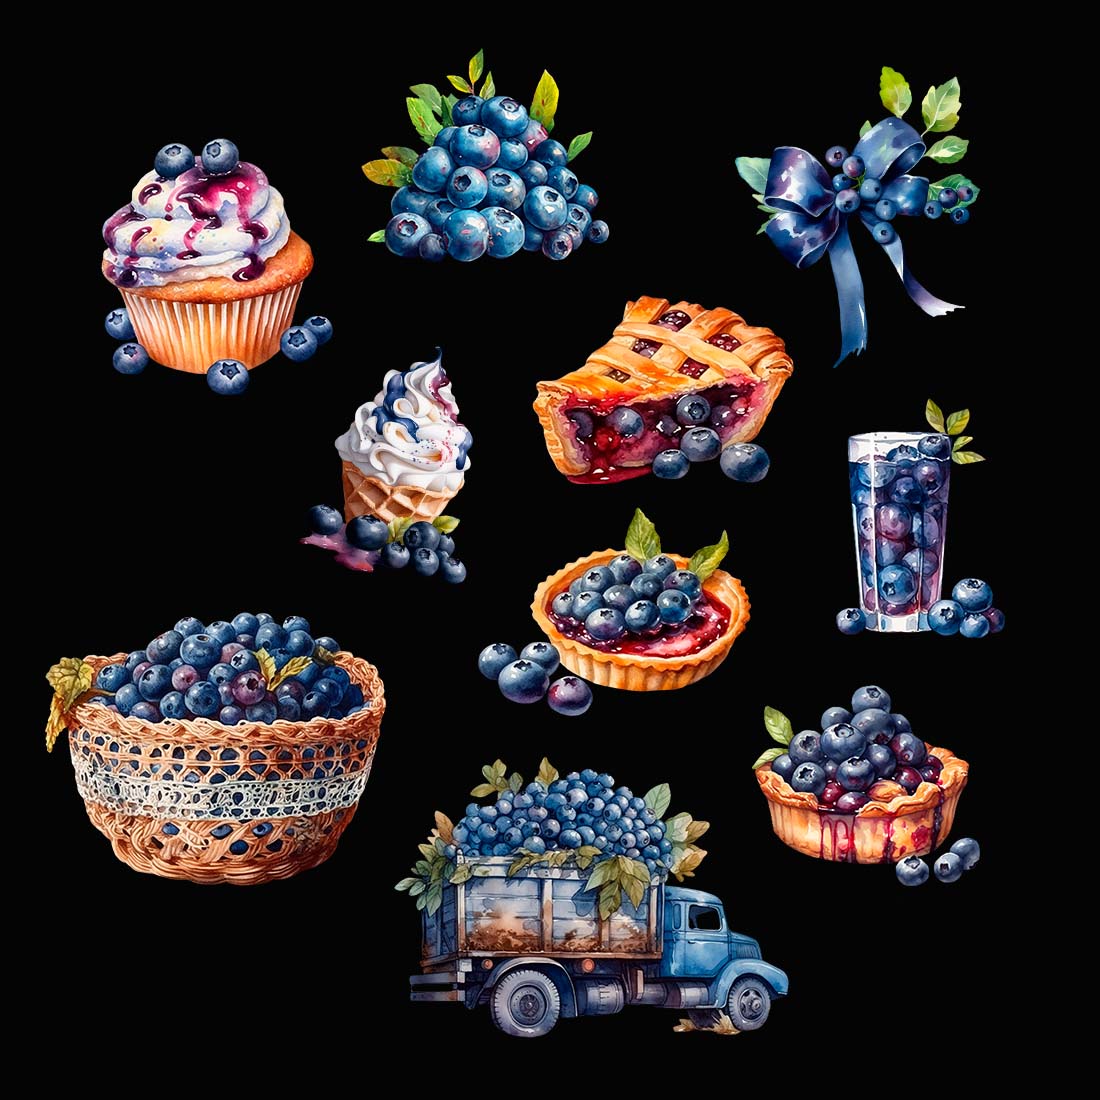 Watercolor Juicy Blueberry Clipart - 10 items in PNG Digital: a blueberry smoothie, three blueberry tarts, a blueberry cupcake, a stack of blueberries, a blueberry ice cream, a basket of fresh picked blueberries and a blue pick up truck with a tray full of blueberries preview image.